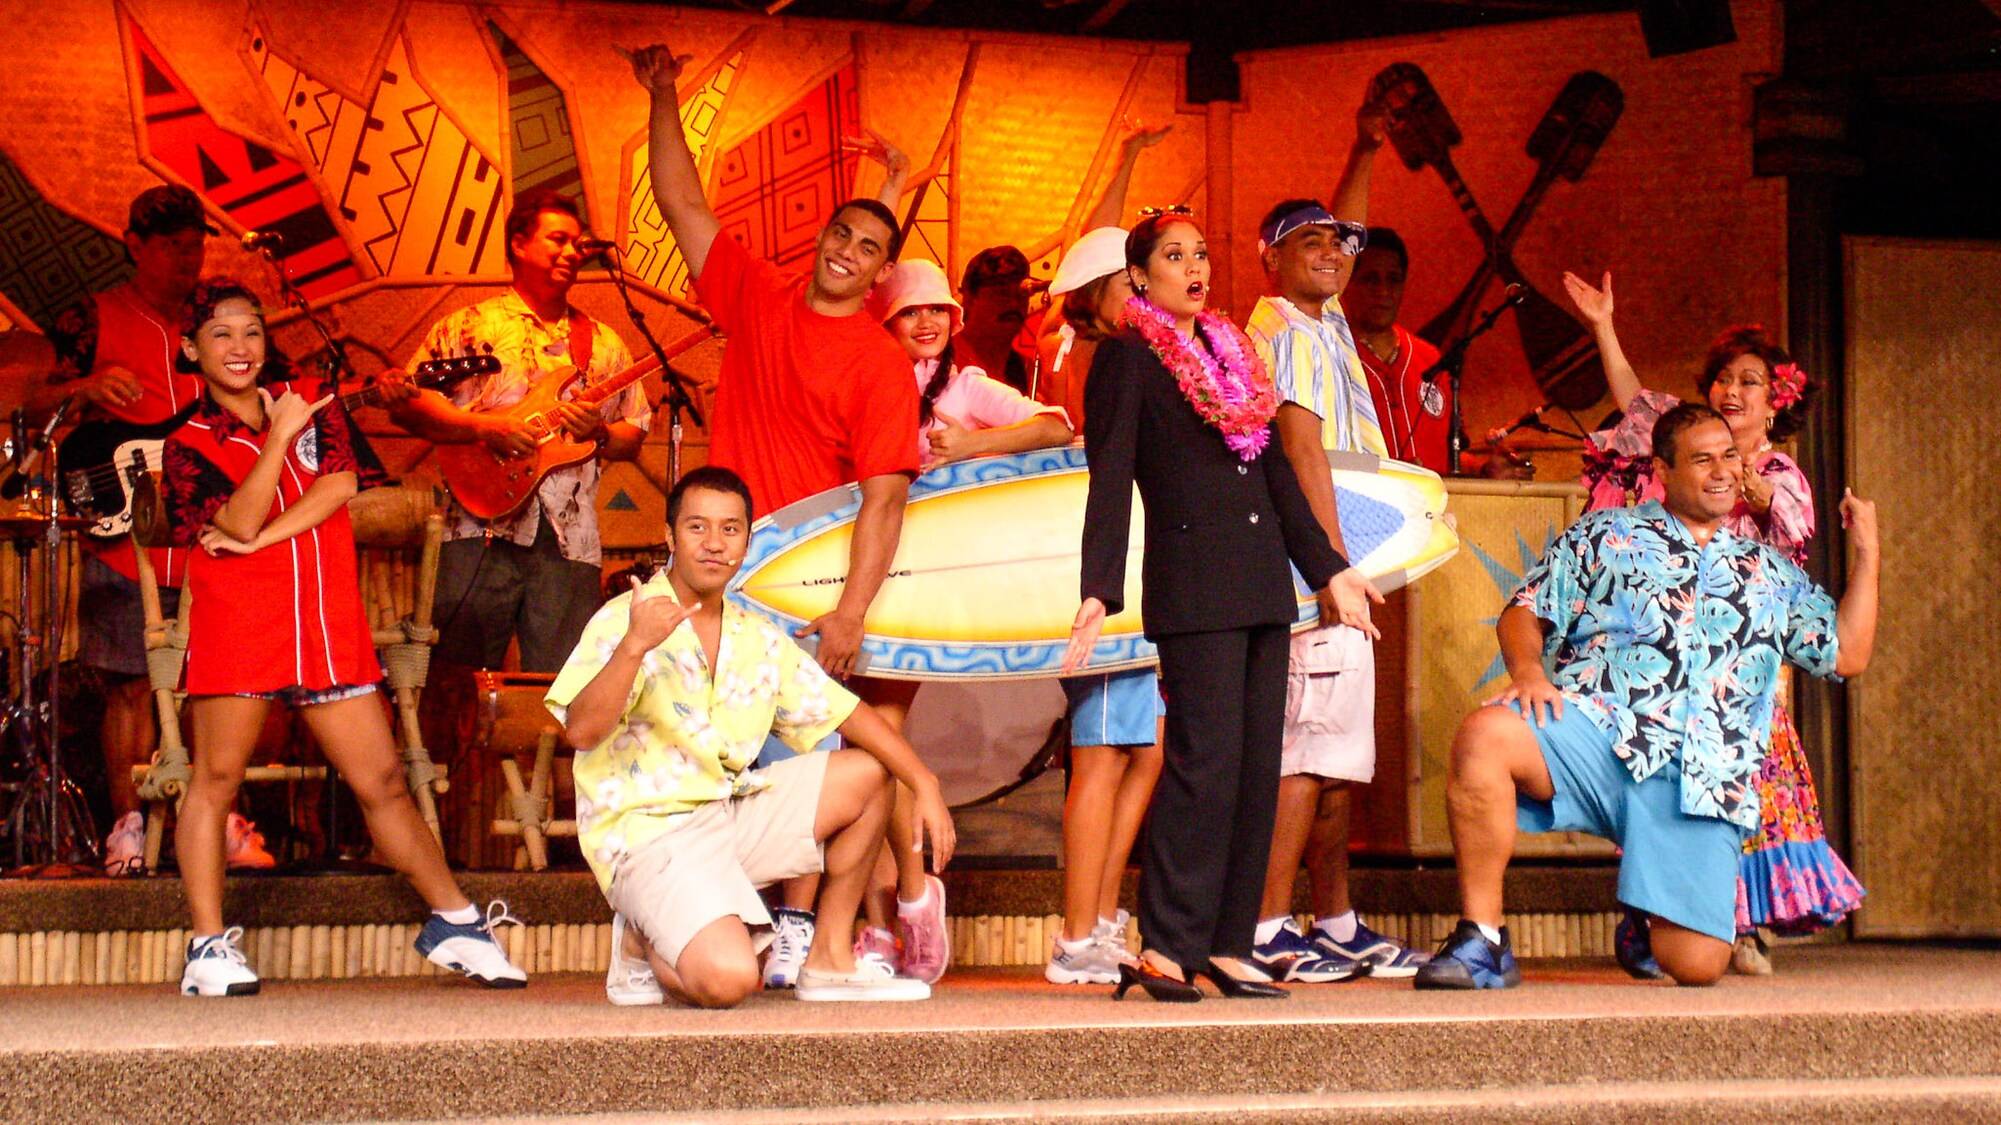 Disney's Spirit of Aloha Dinner Show will not reopen and is permanently closed according to reports